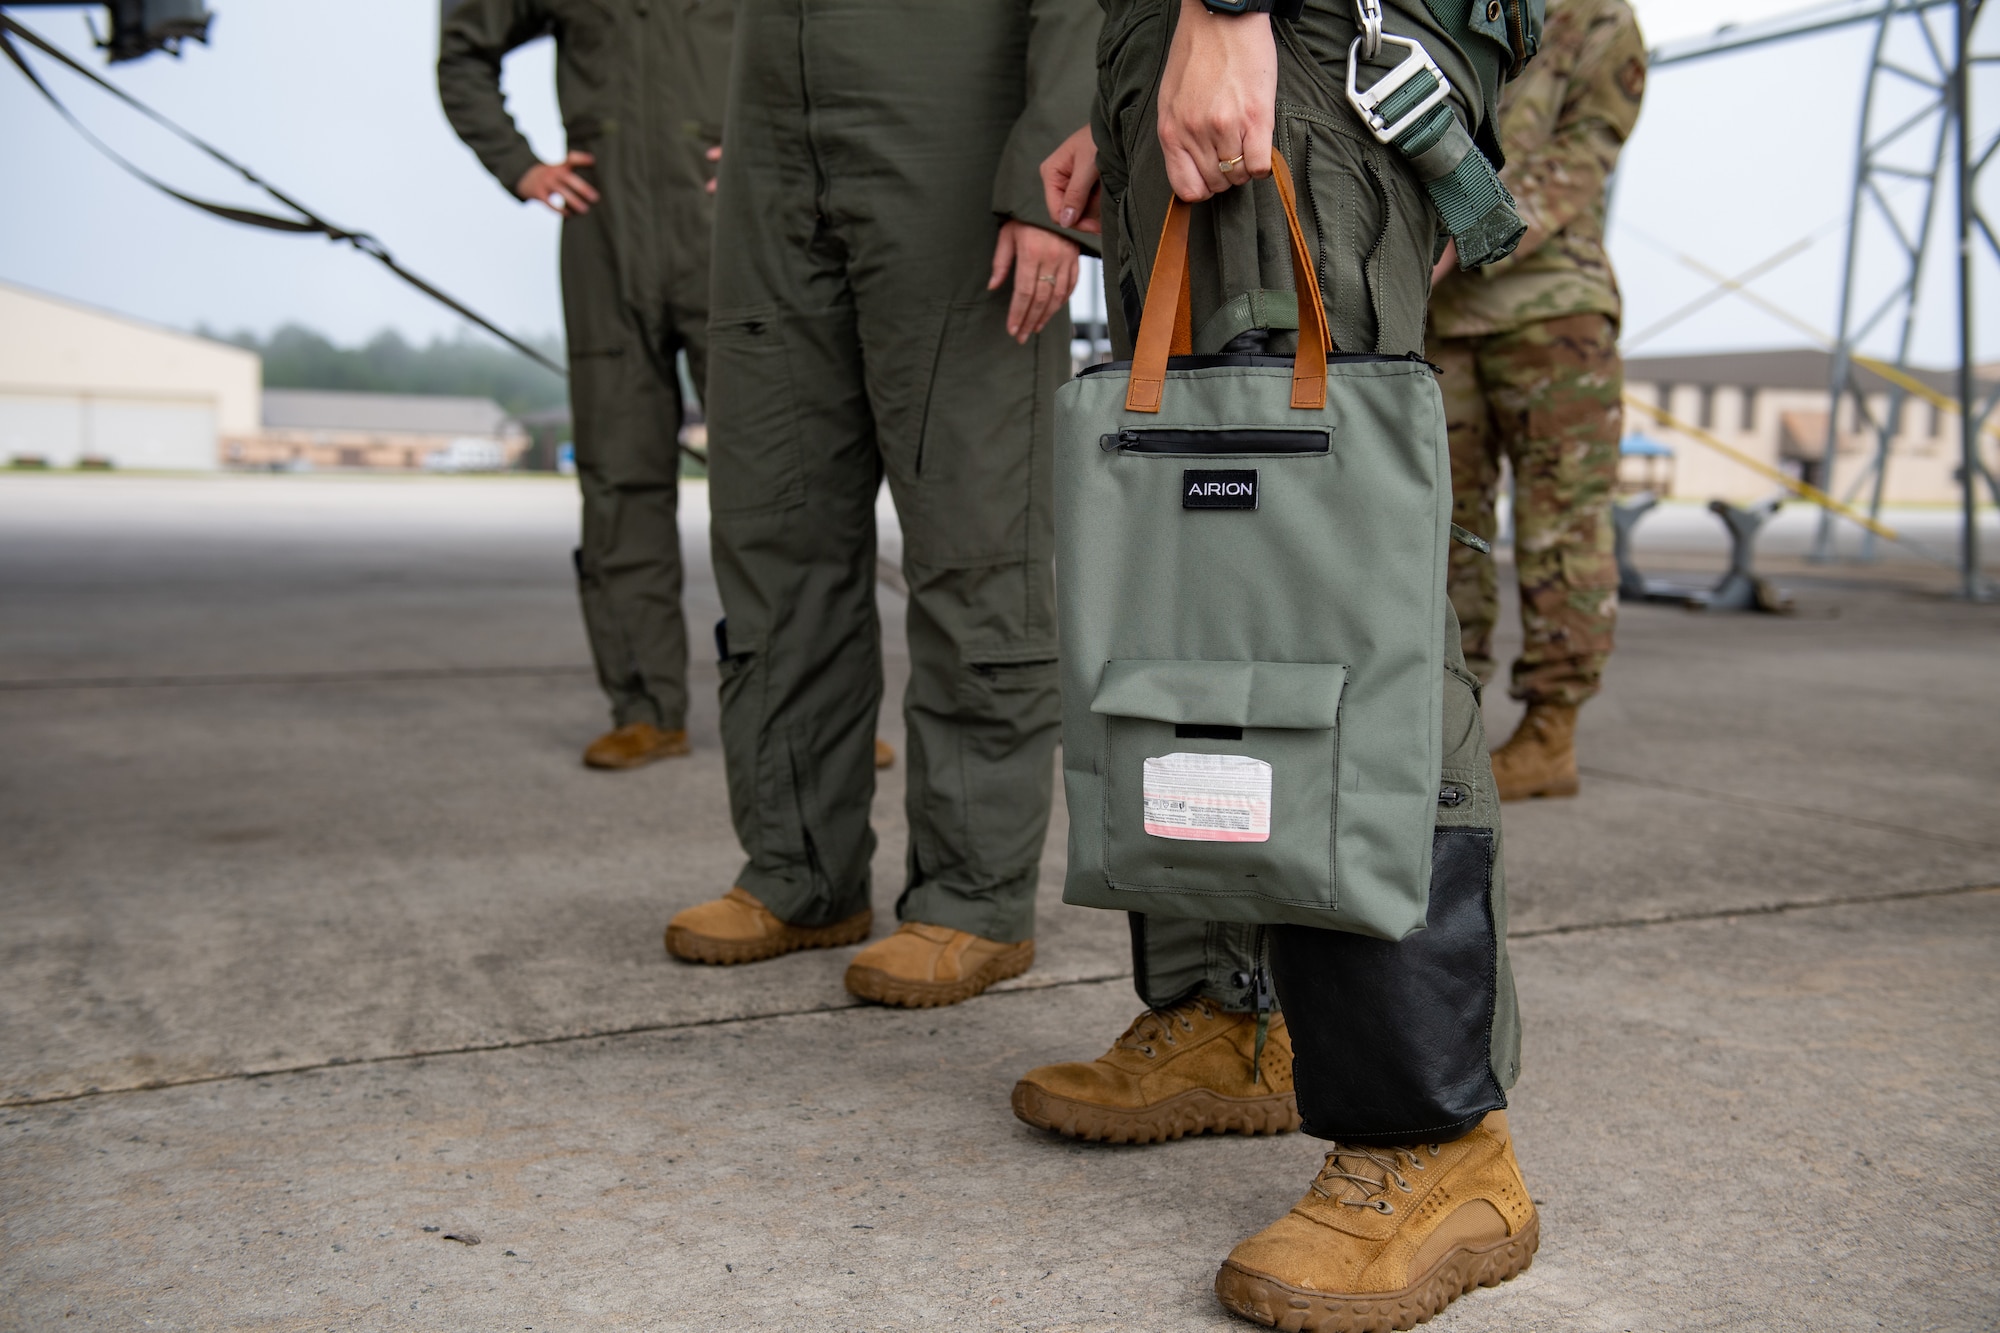 A U.S. Air Force pilot assigned to the 74th Fighter Squadron holds an Airus bladder relief system at Moody Air Force Base, Georgia, Aug. 28, 2023. The new system was tested in an effort to bring the Air Force one step closer to an effective in-flight bladder relief solution for female pilots. (U.S. Air Force photo by Senior Airman Courtney Sebastianelli)